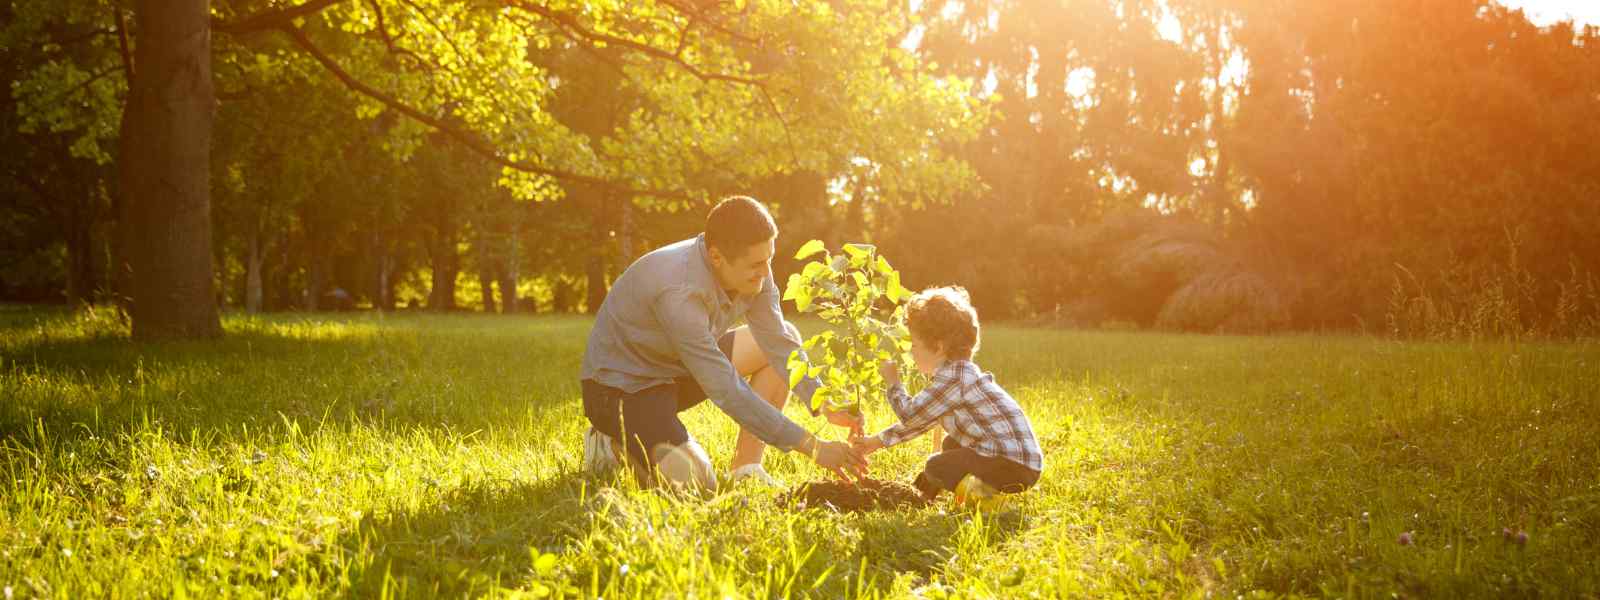 Parent and child planting a tree